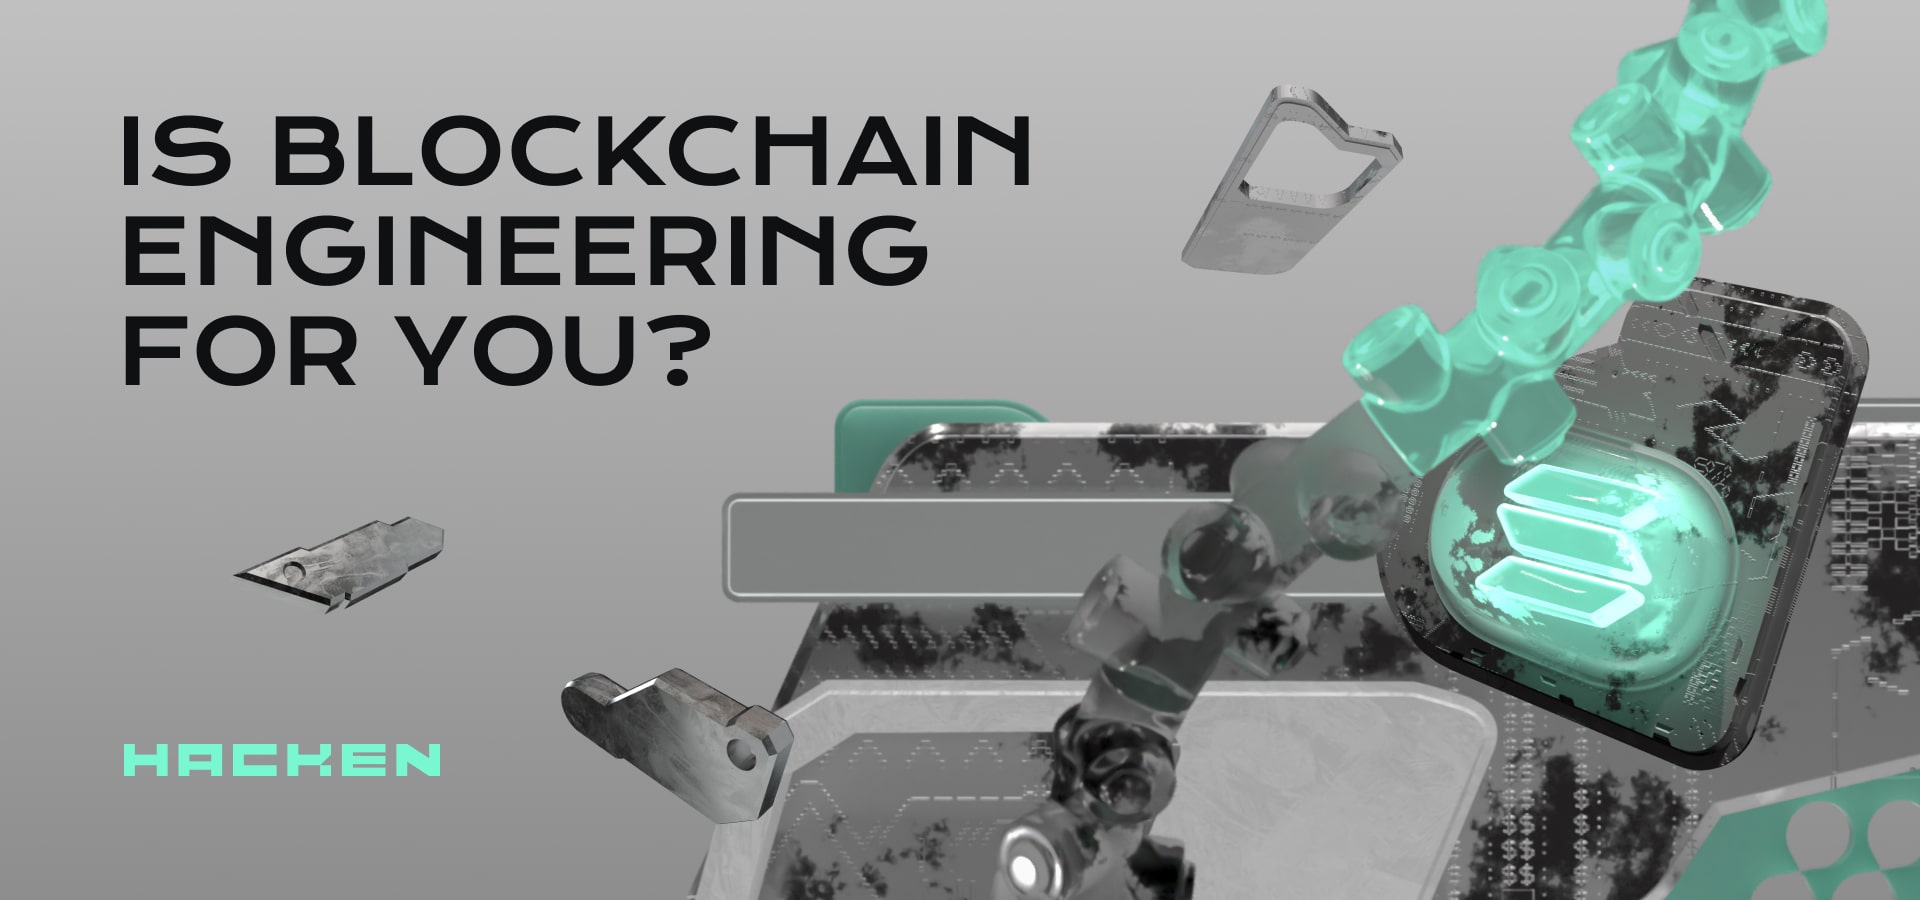 Is Blockchain Engineering for you?